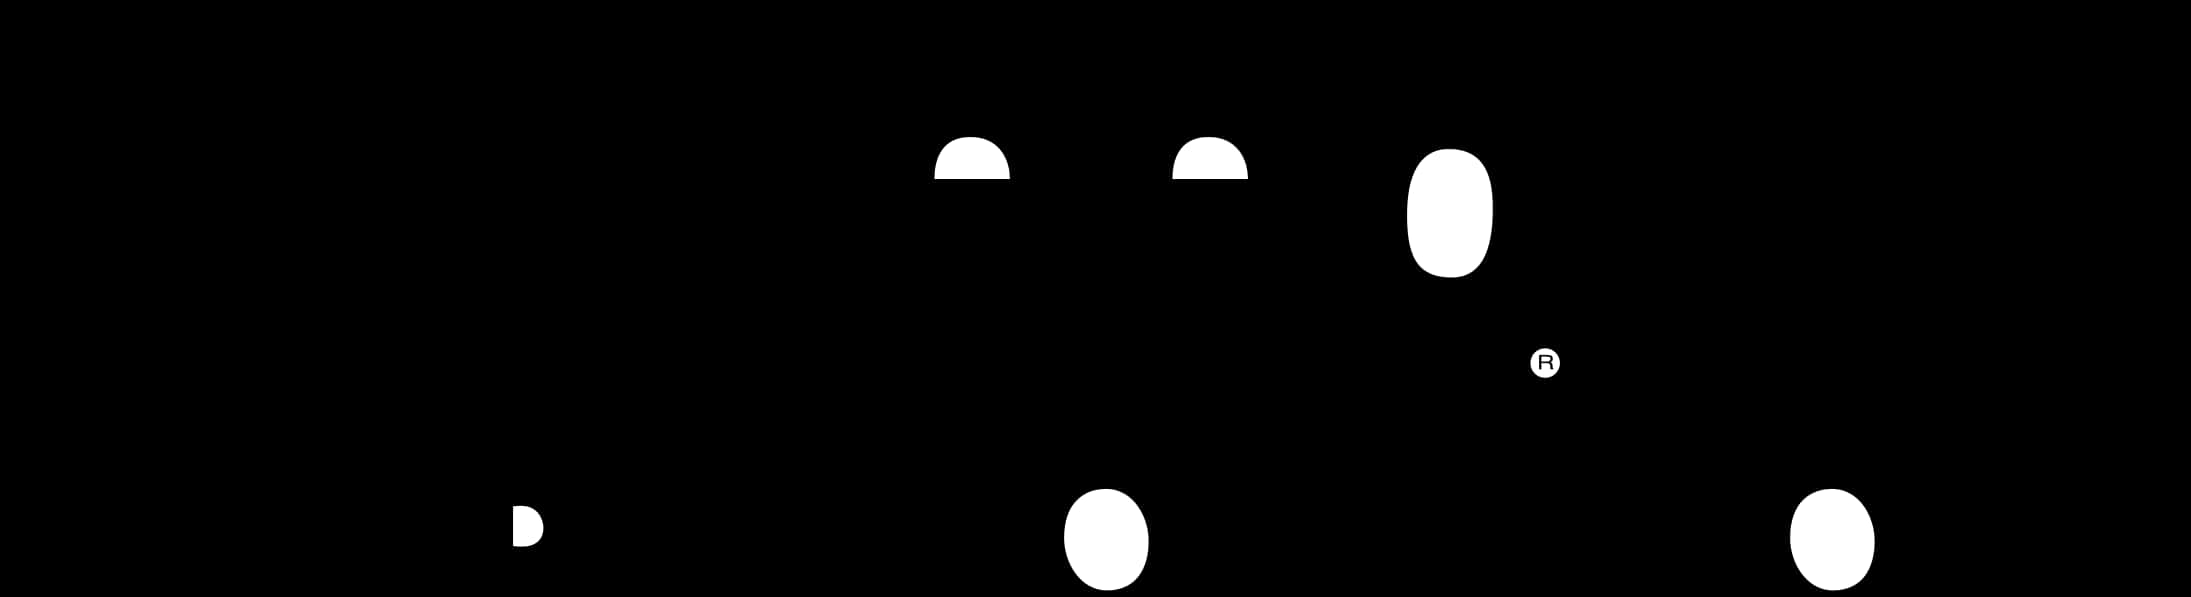 A Black And White Image Of A Face